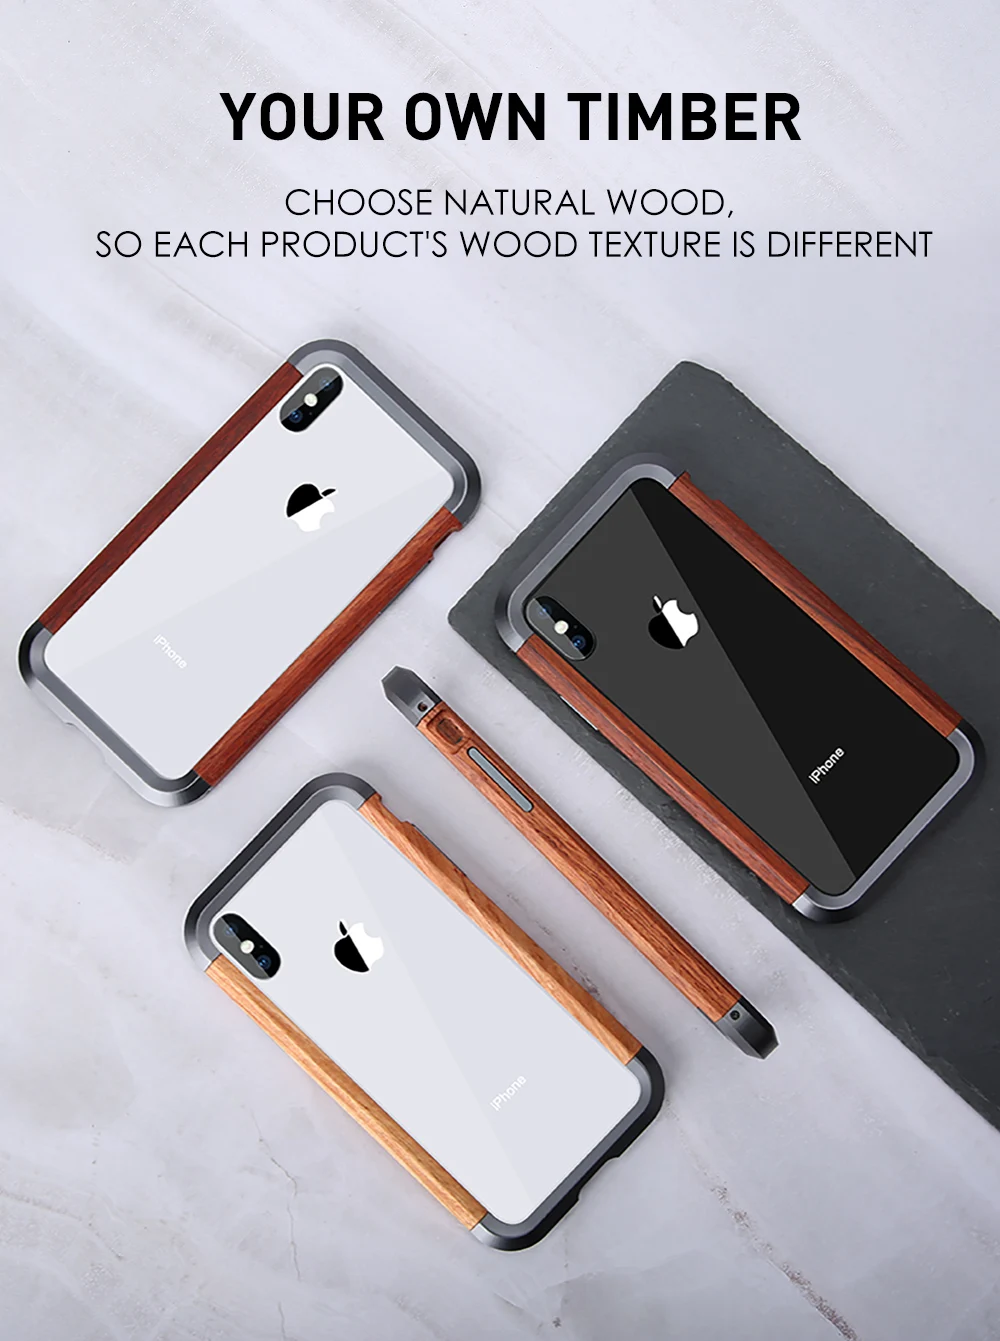 Phone Case For iPhone 11 11 Pro 11 Pro Max Luxury Hard Metal Aluminum Wood Protective Bumper Phone Case for iPhone XS X